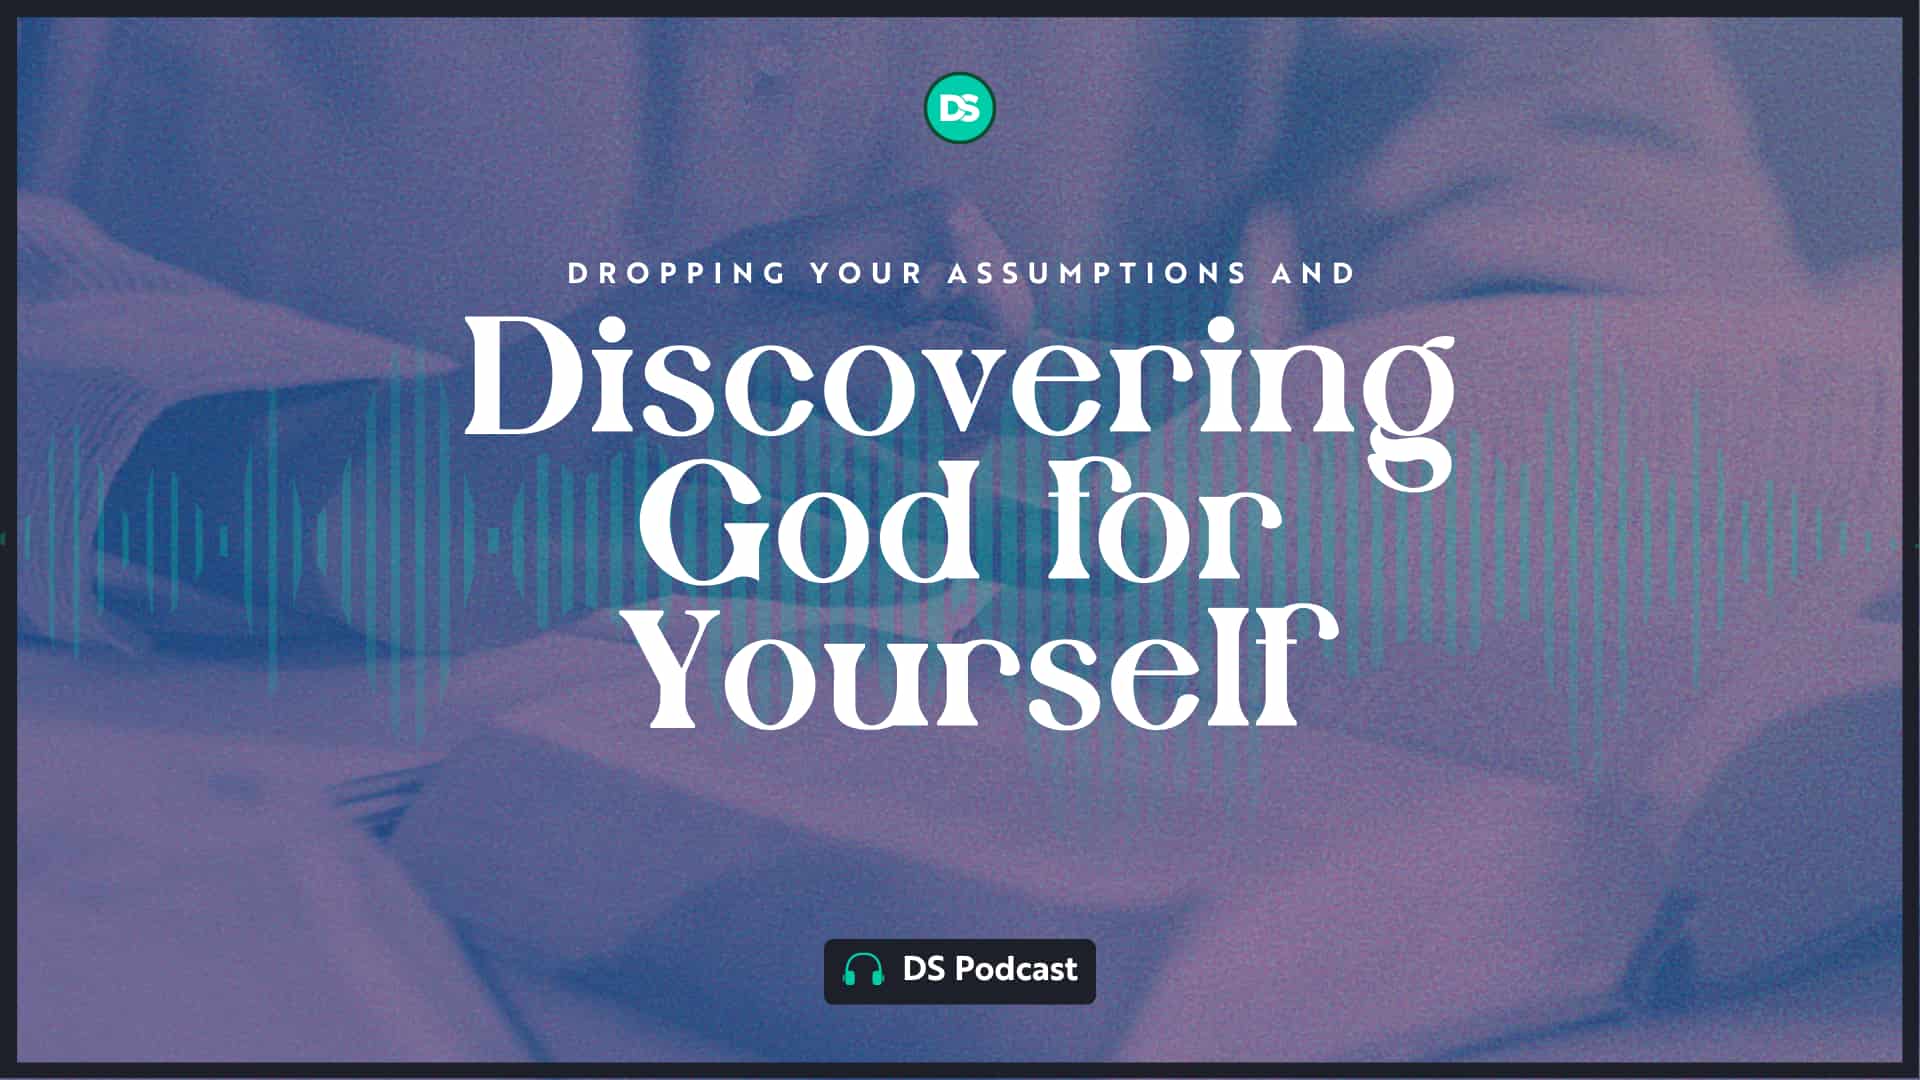 Dropping Your Assumptions and Discovering God for Yourself 4